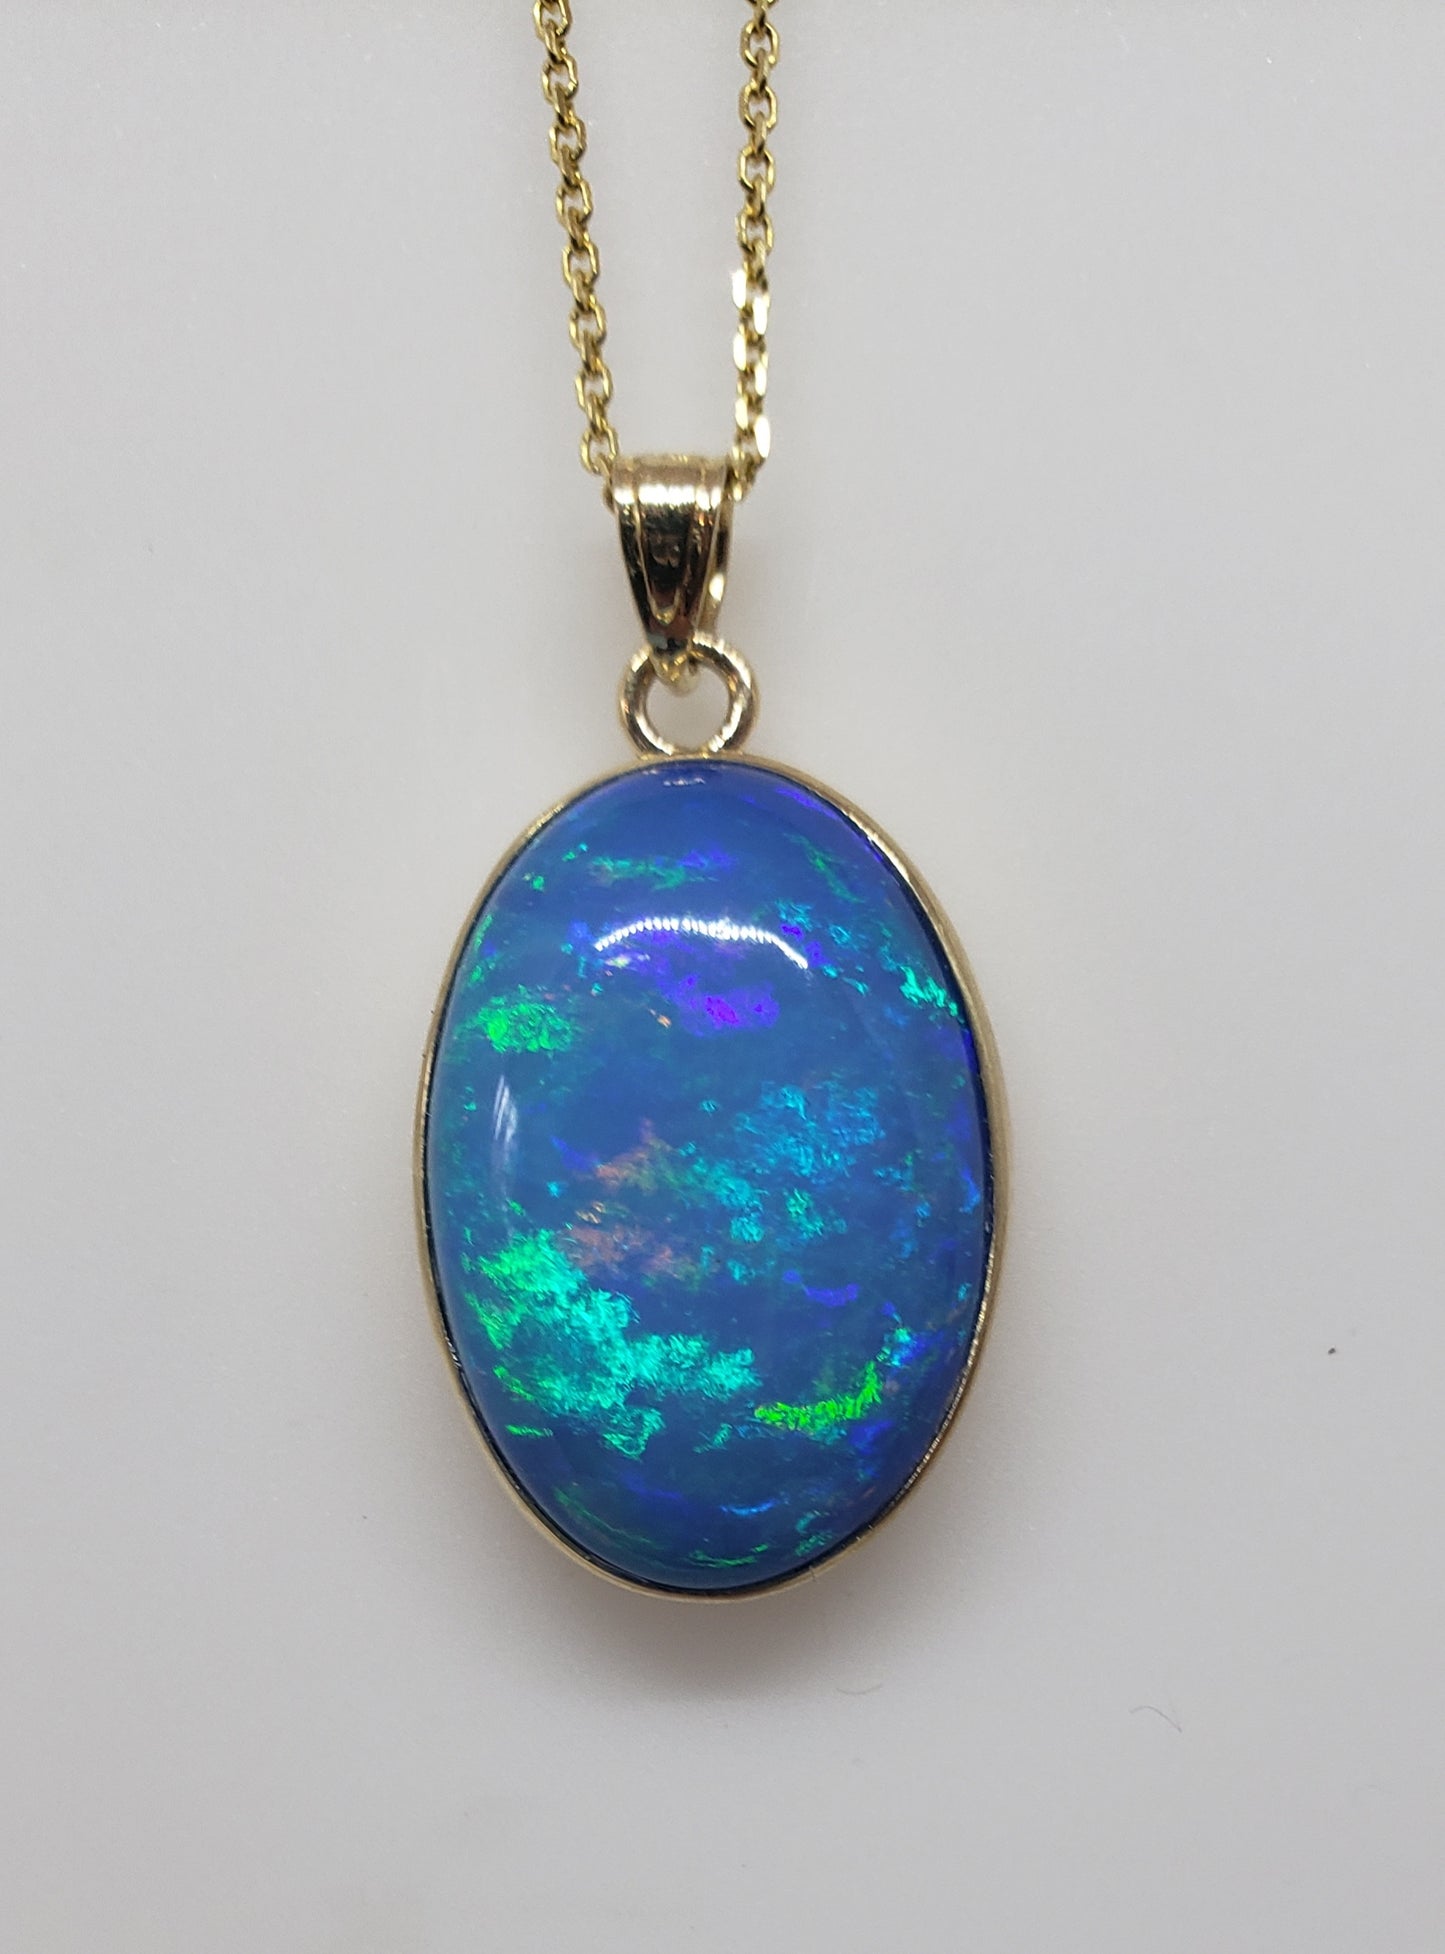 Blue Opal Pendant 14k Yellow Gold Chain Necklace #150